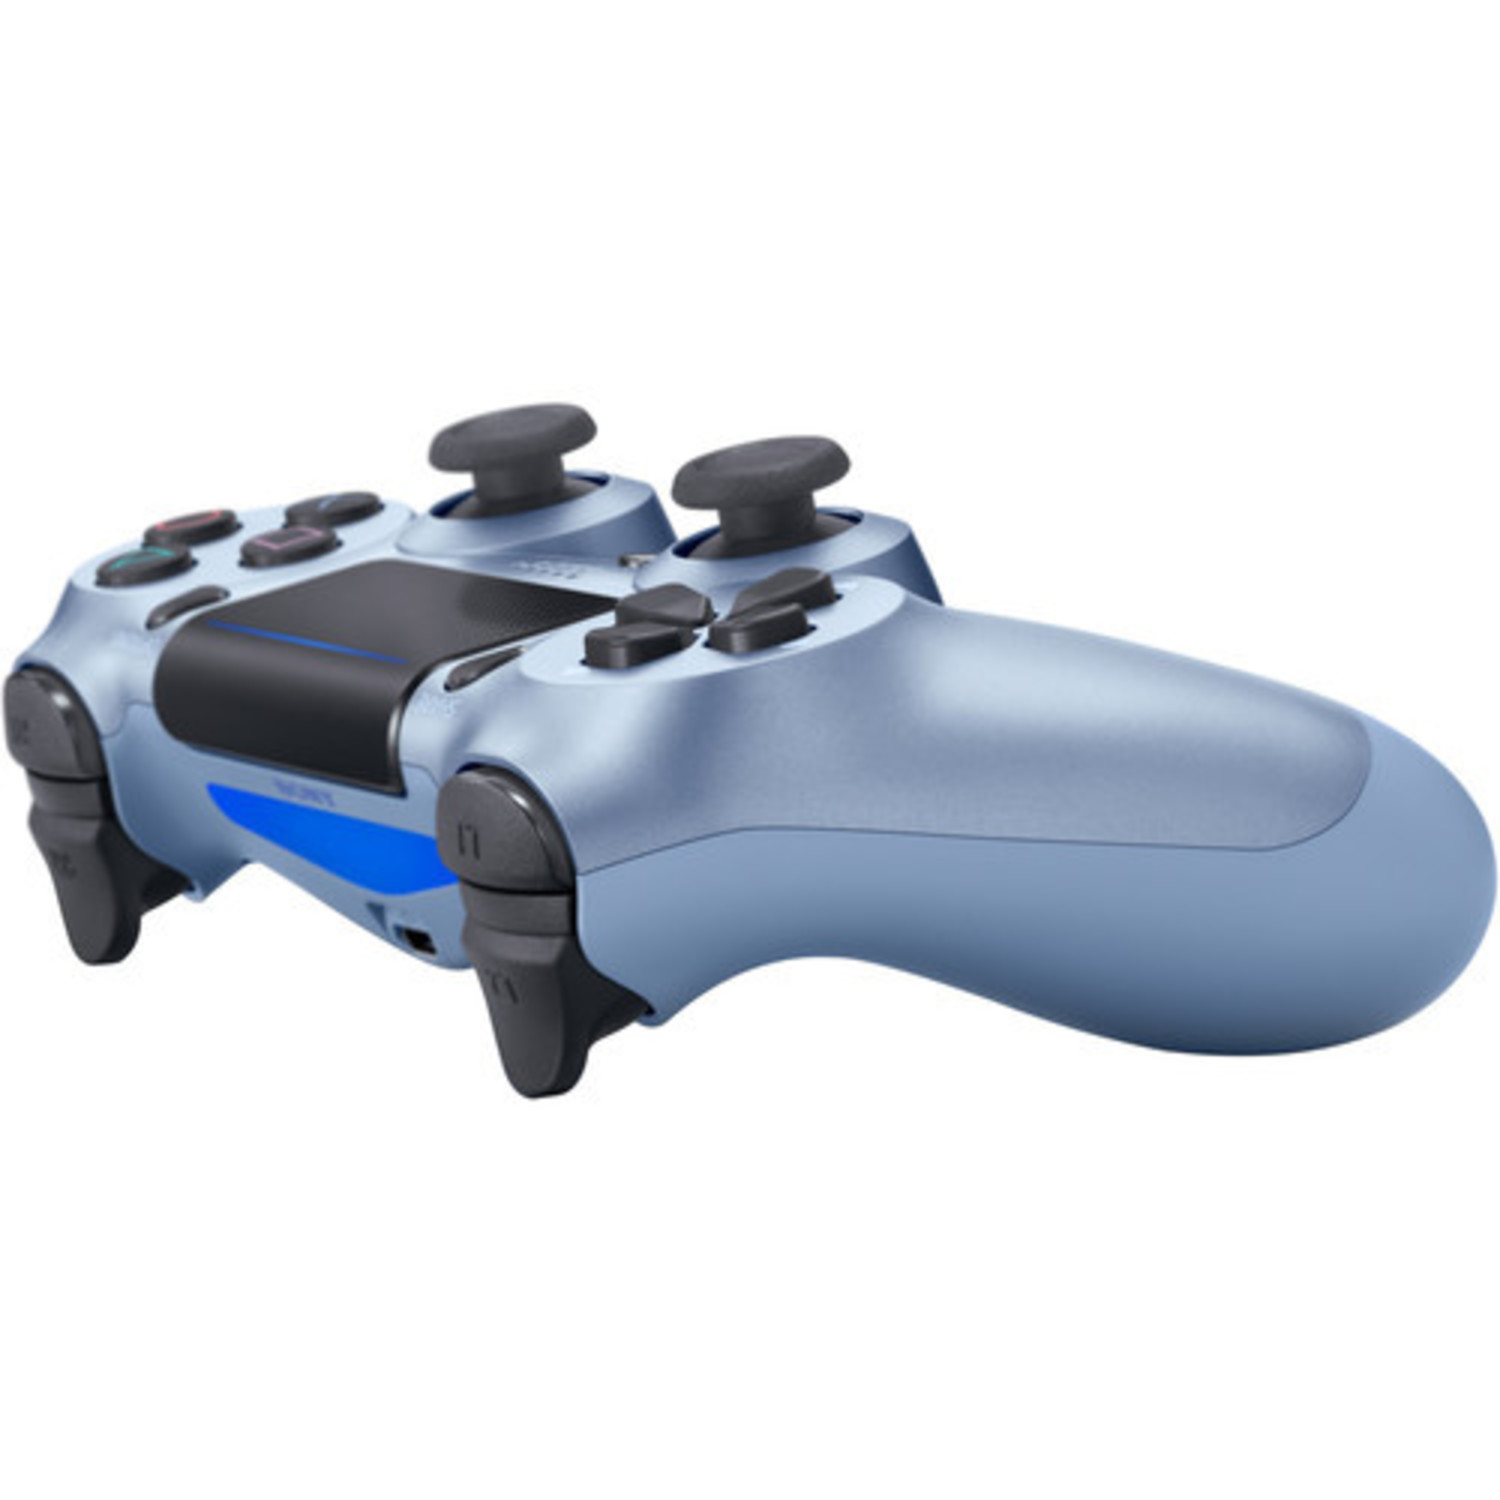 teal playstation controller